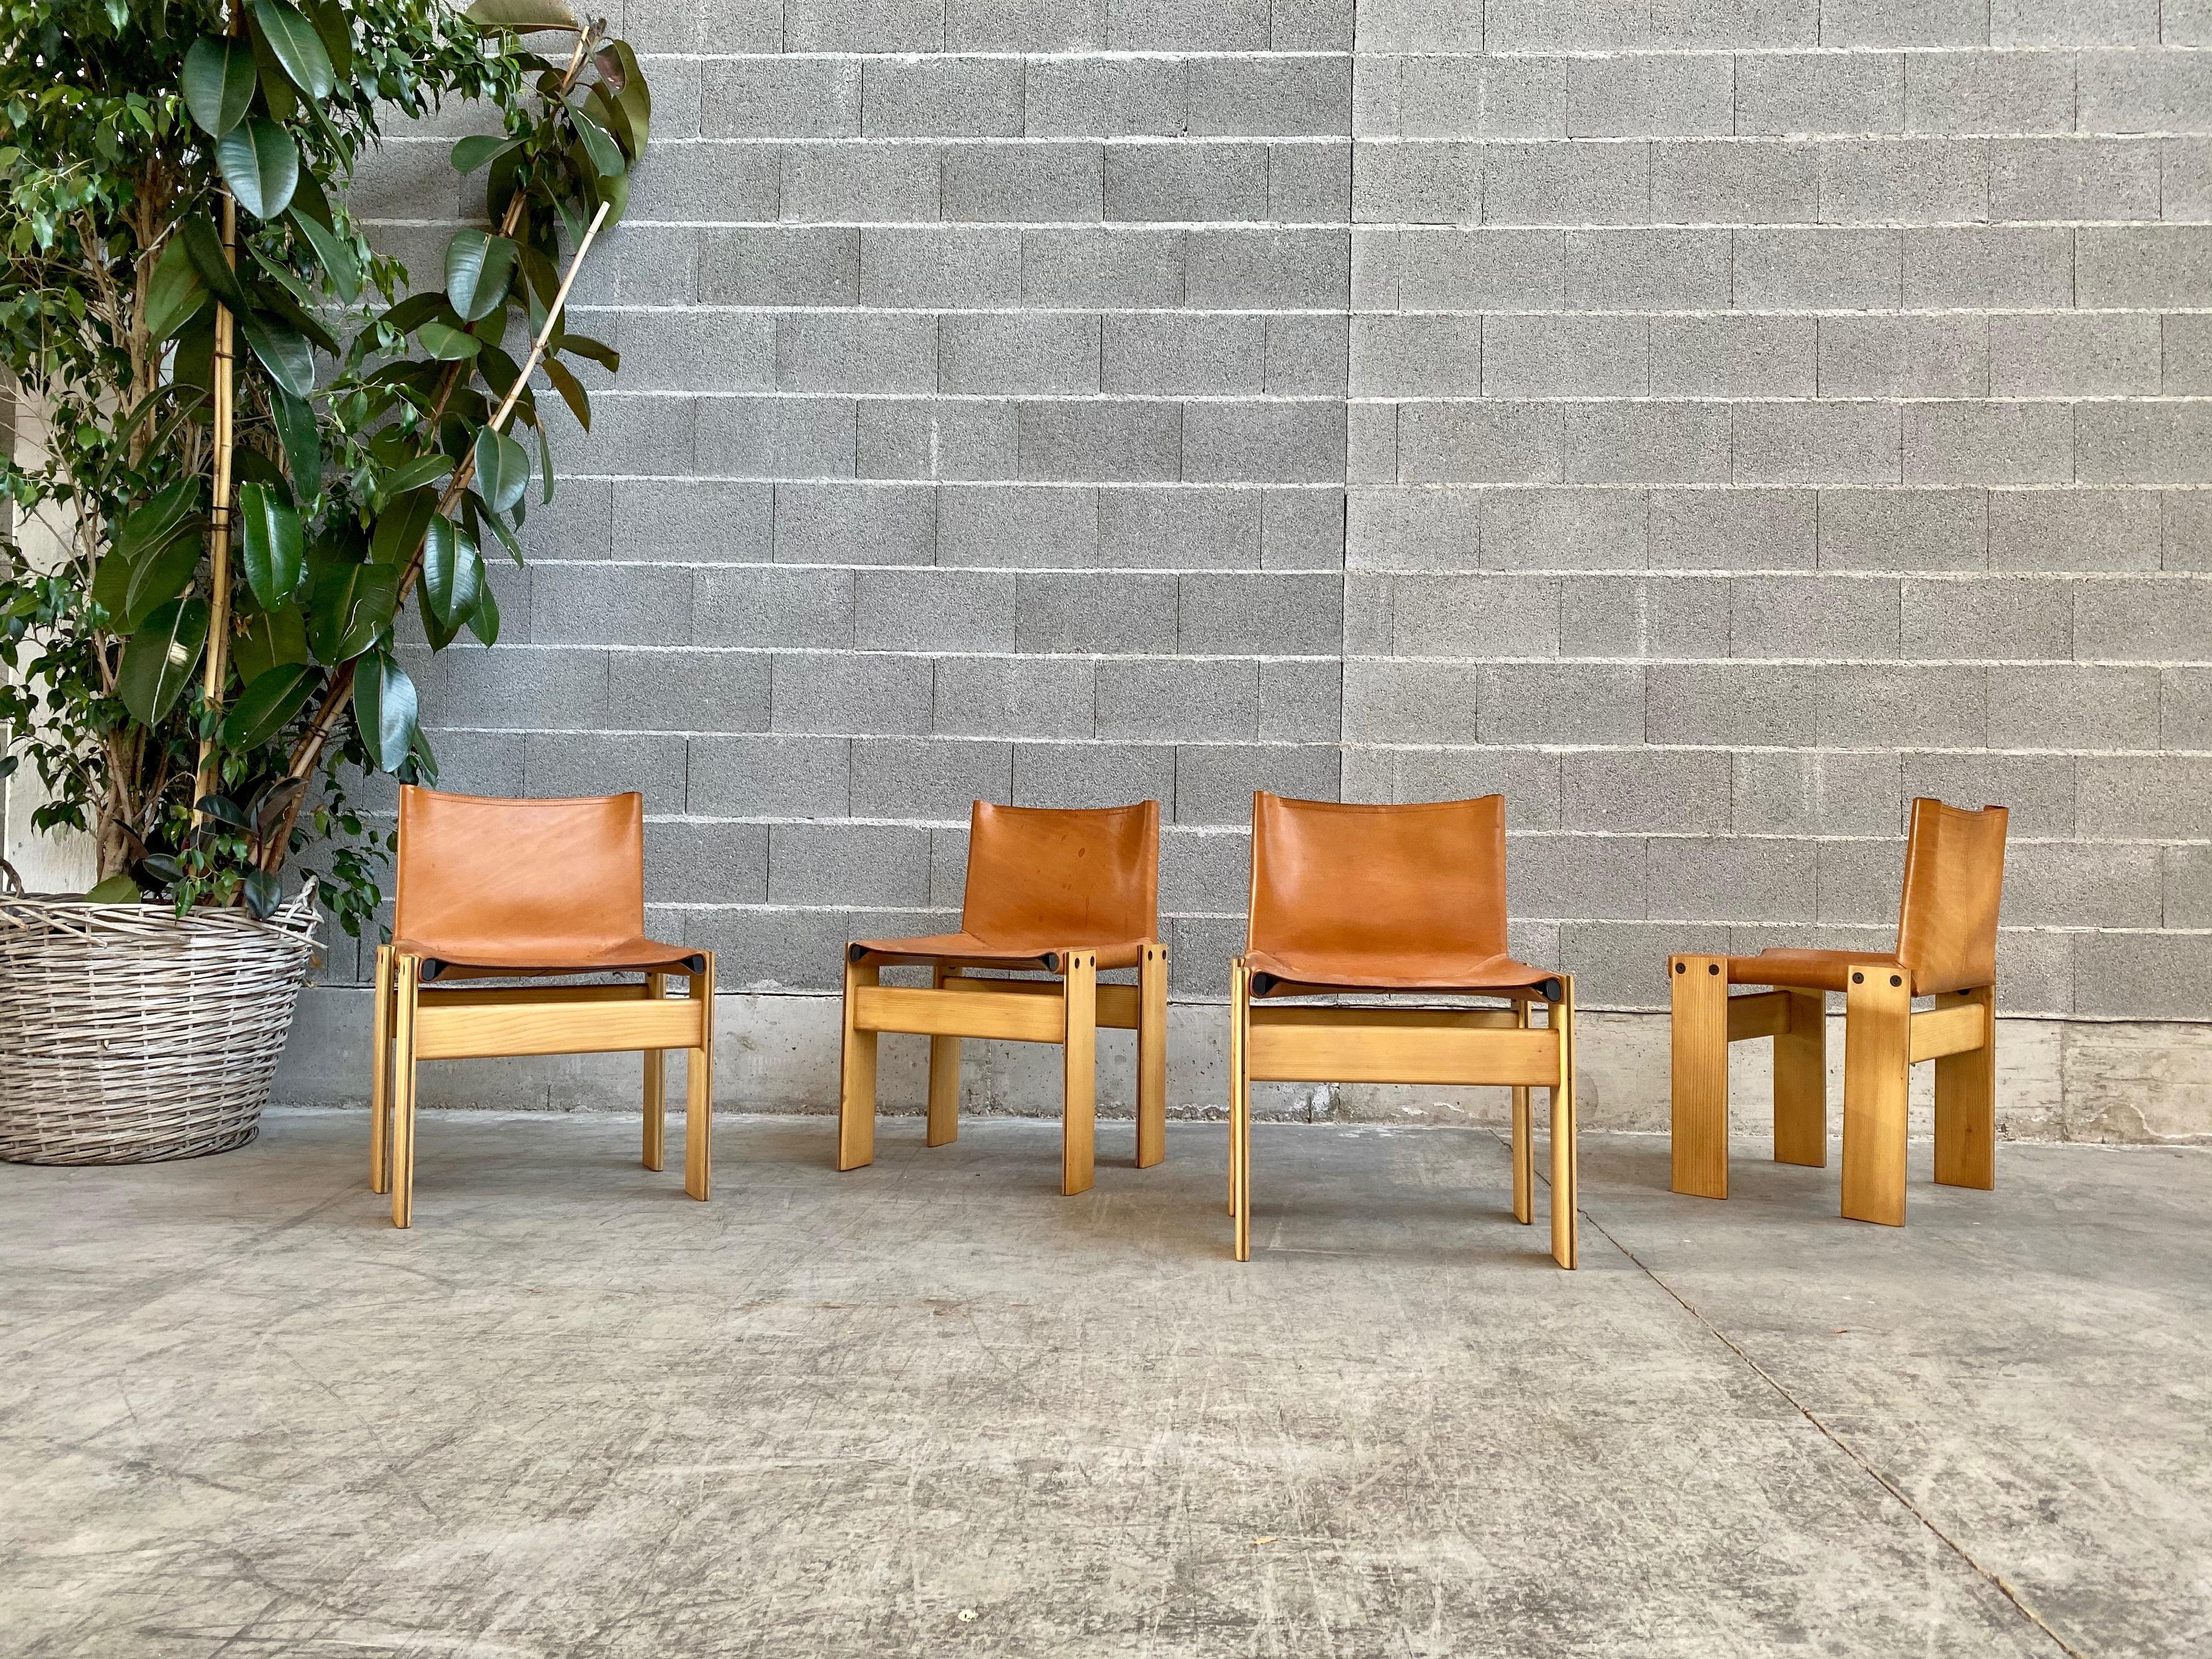 Afra & Tobia Scarpa “Monk” dining chairs for Molteni, Set of 4.

Set of 4 cognac leather “Monk” dining chairs designed by Afra & Tobia Scarpa for Molteni, 1973. 
Excellent condition. The cognac leather have a great patina, just few and slight